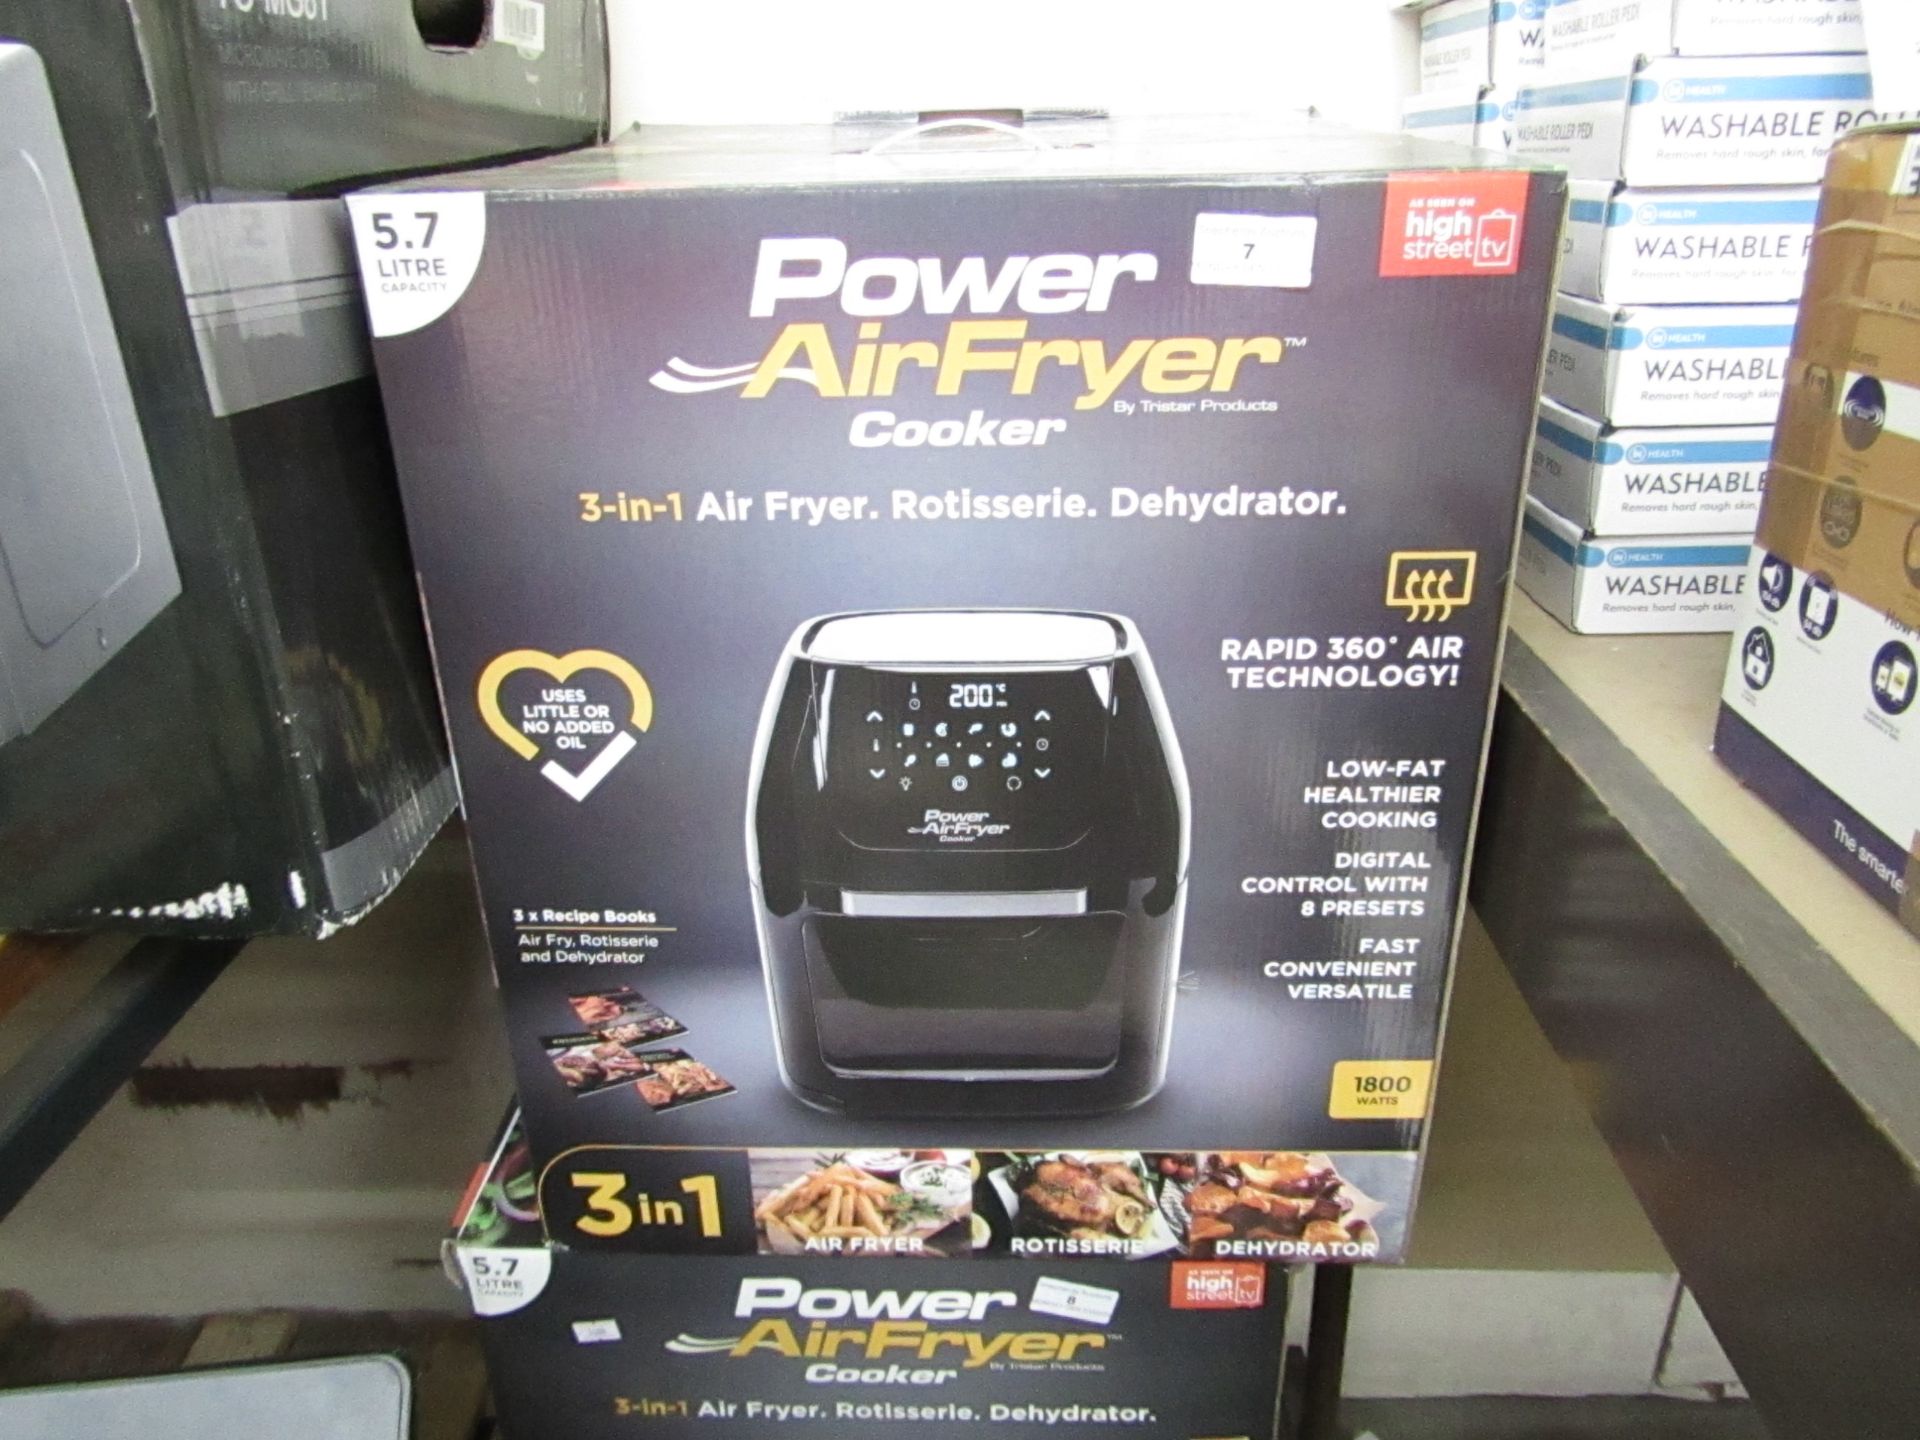 | 1x | POWER AIR FRYER 3 IN 1 5.7L | UNTESTED,BOXED & UNCHECKED FOR ACCESSORIES | NO ONLINE RE-